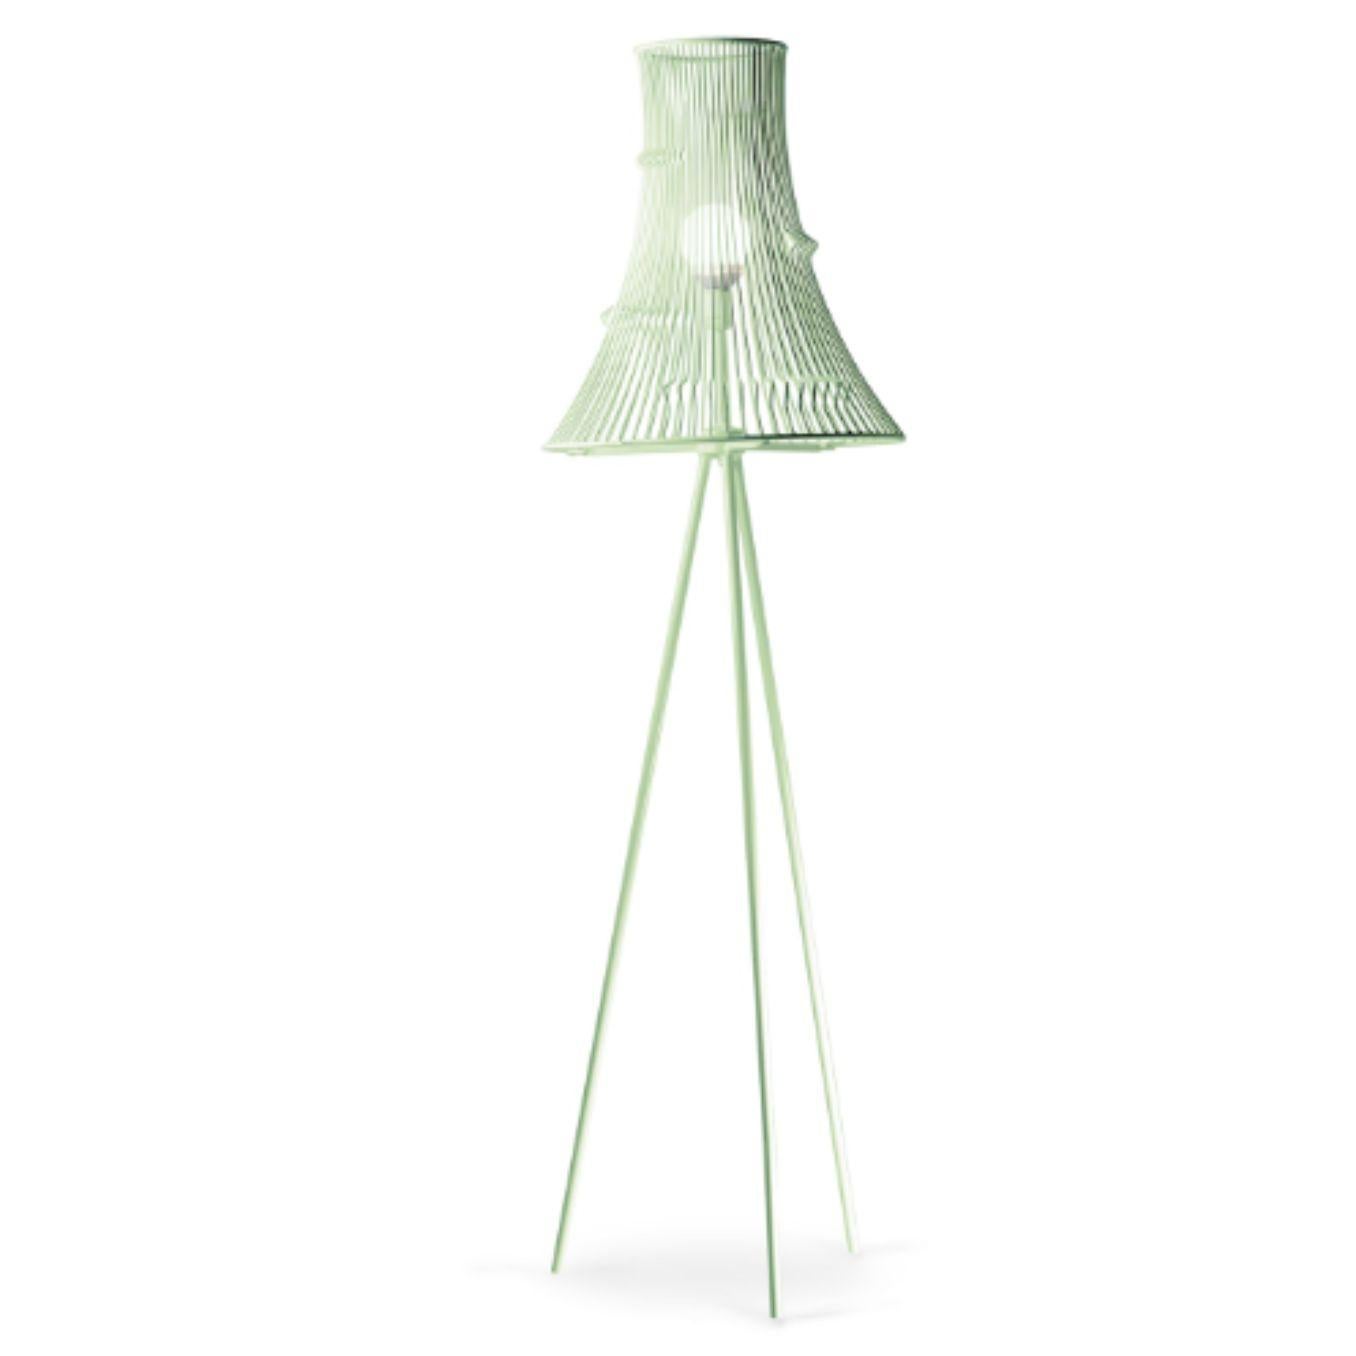 Dream extrude floor lamp by Dooq.
Dimensions: W 50 x D 50 x H 175 cm.
Materials: lacquered metal, polished or brushed metal.
Also available in different colors and materials. 

Information:
230V/50Hz
E27/1x20W LED
120V/60Hz
E26/1x15W LED
bulb not